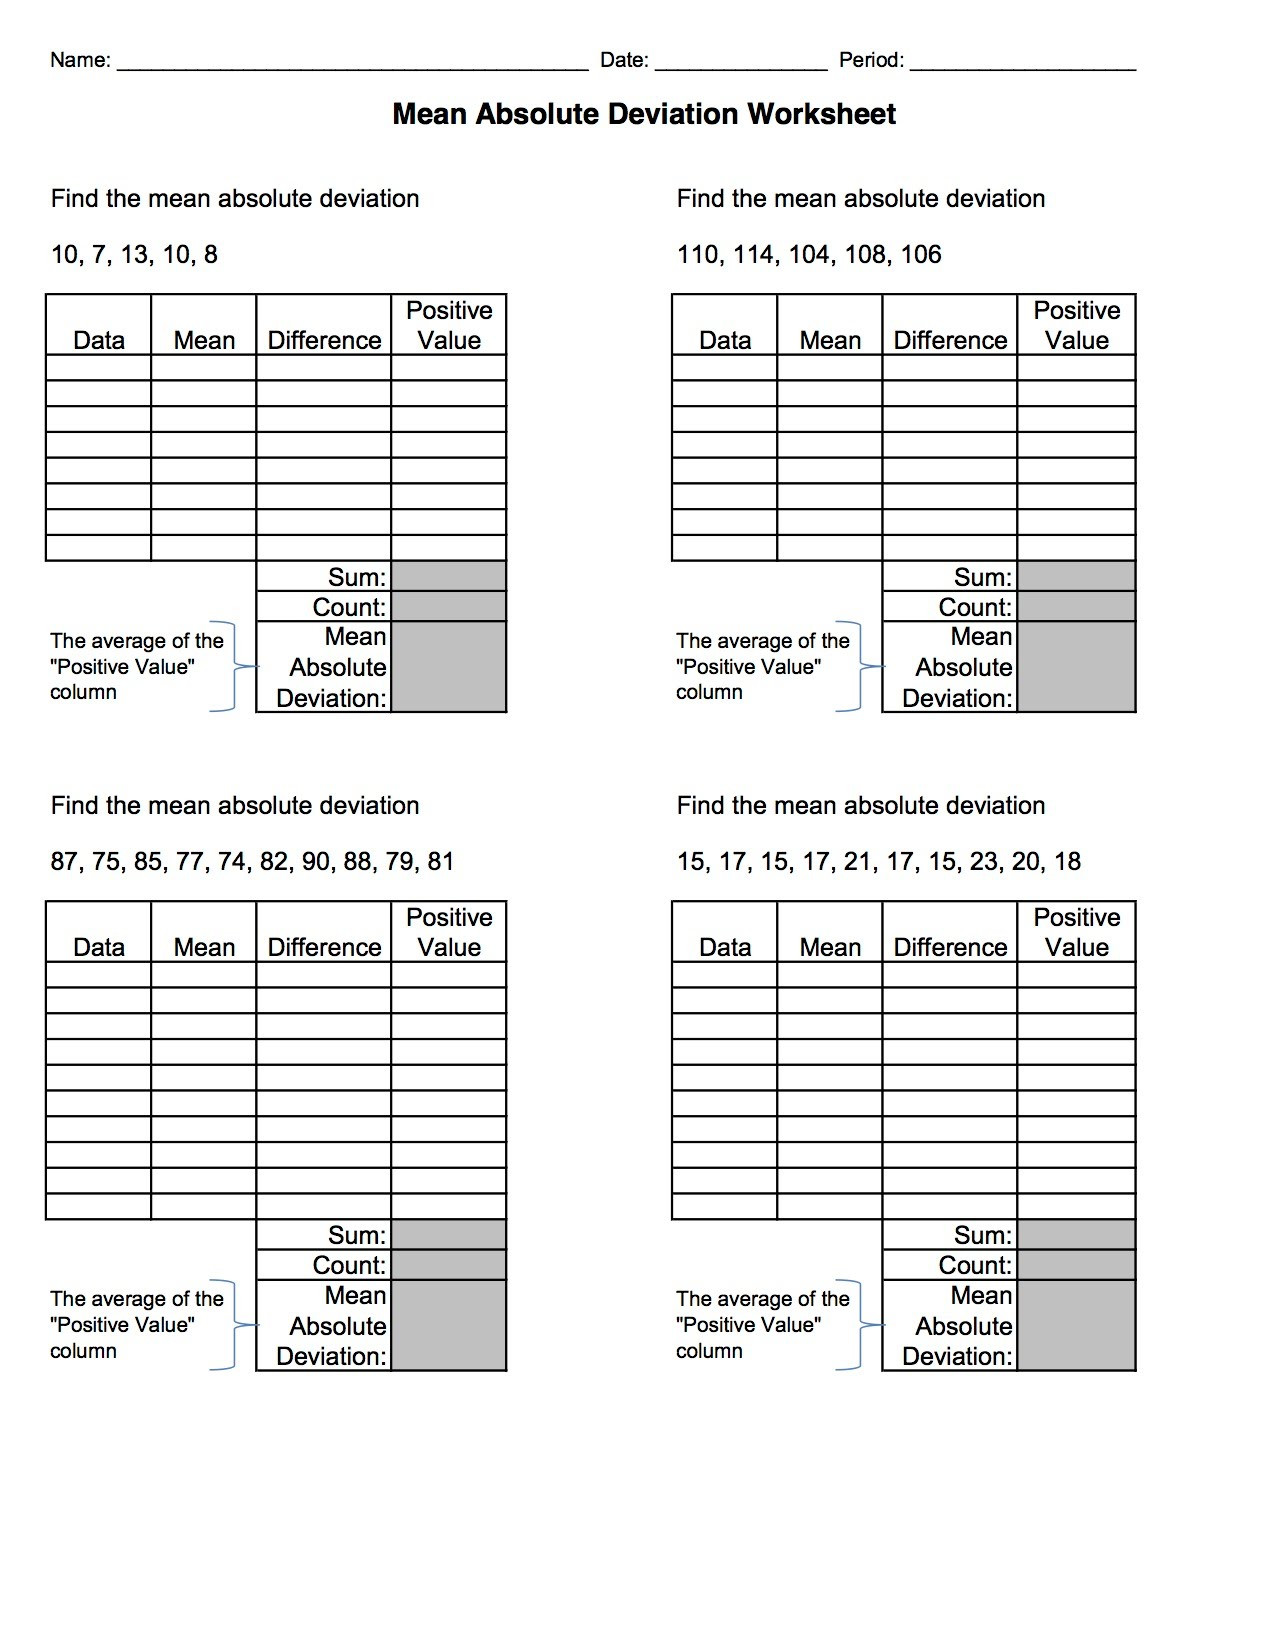 Mean Absolute Deviation Worksheet Make Up assignments